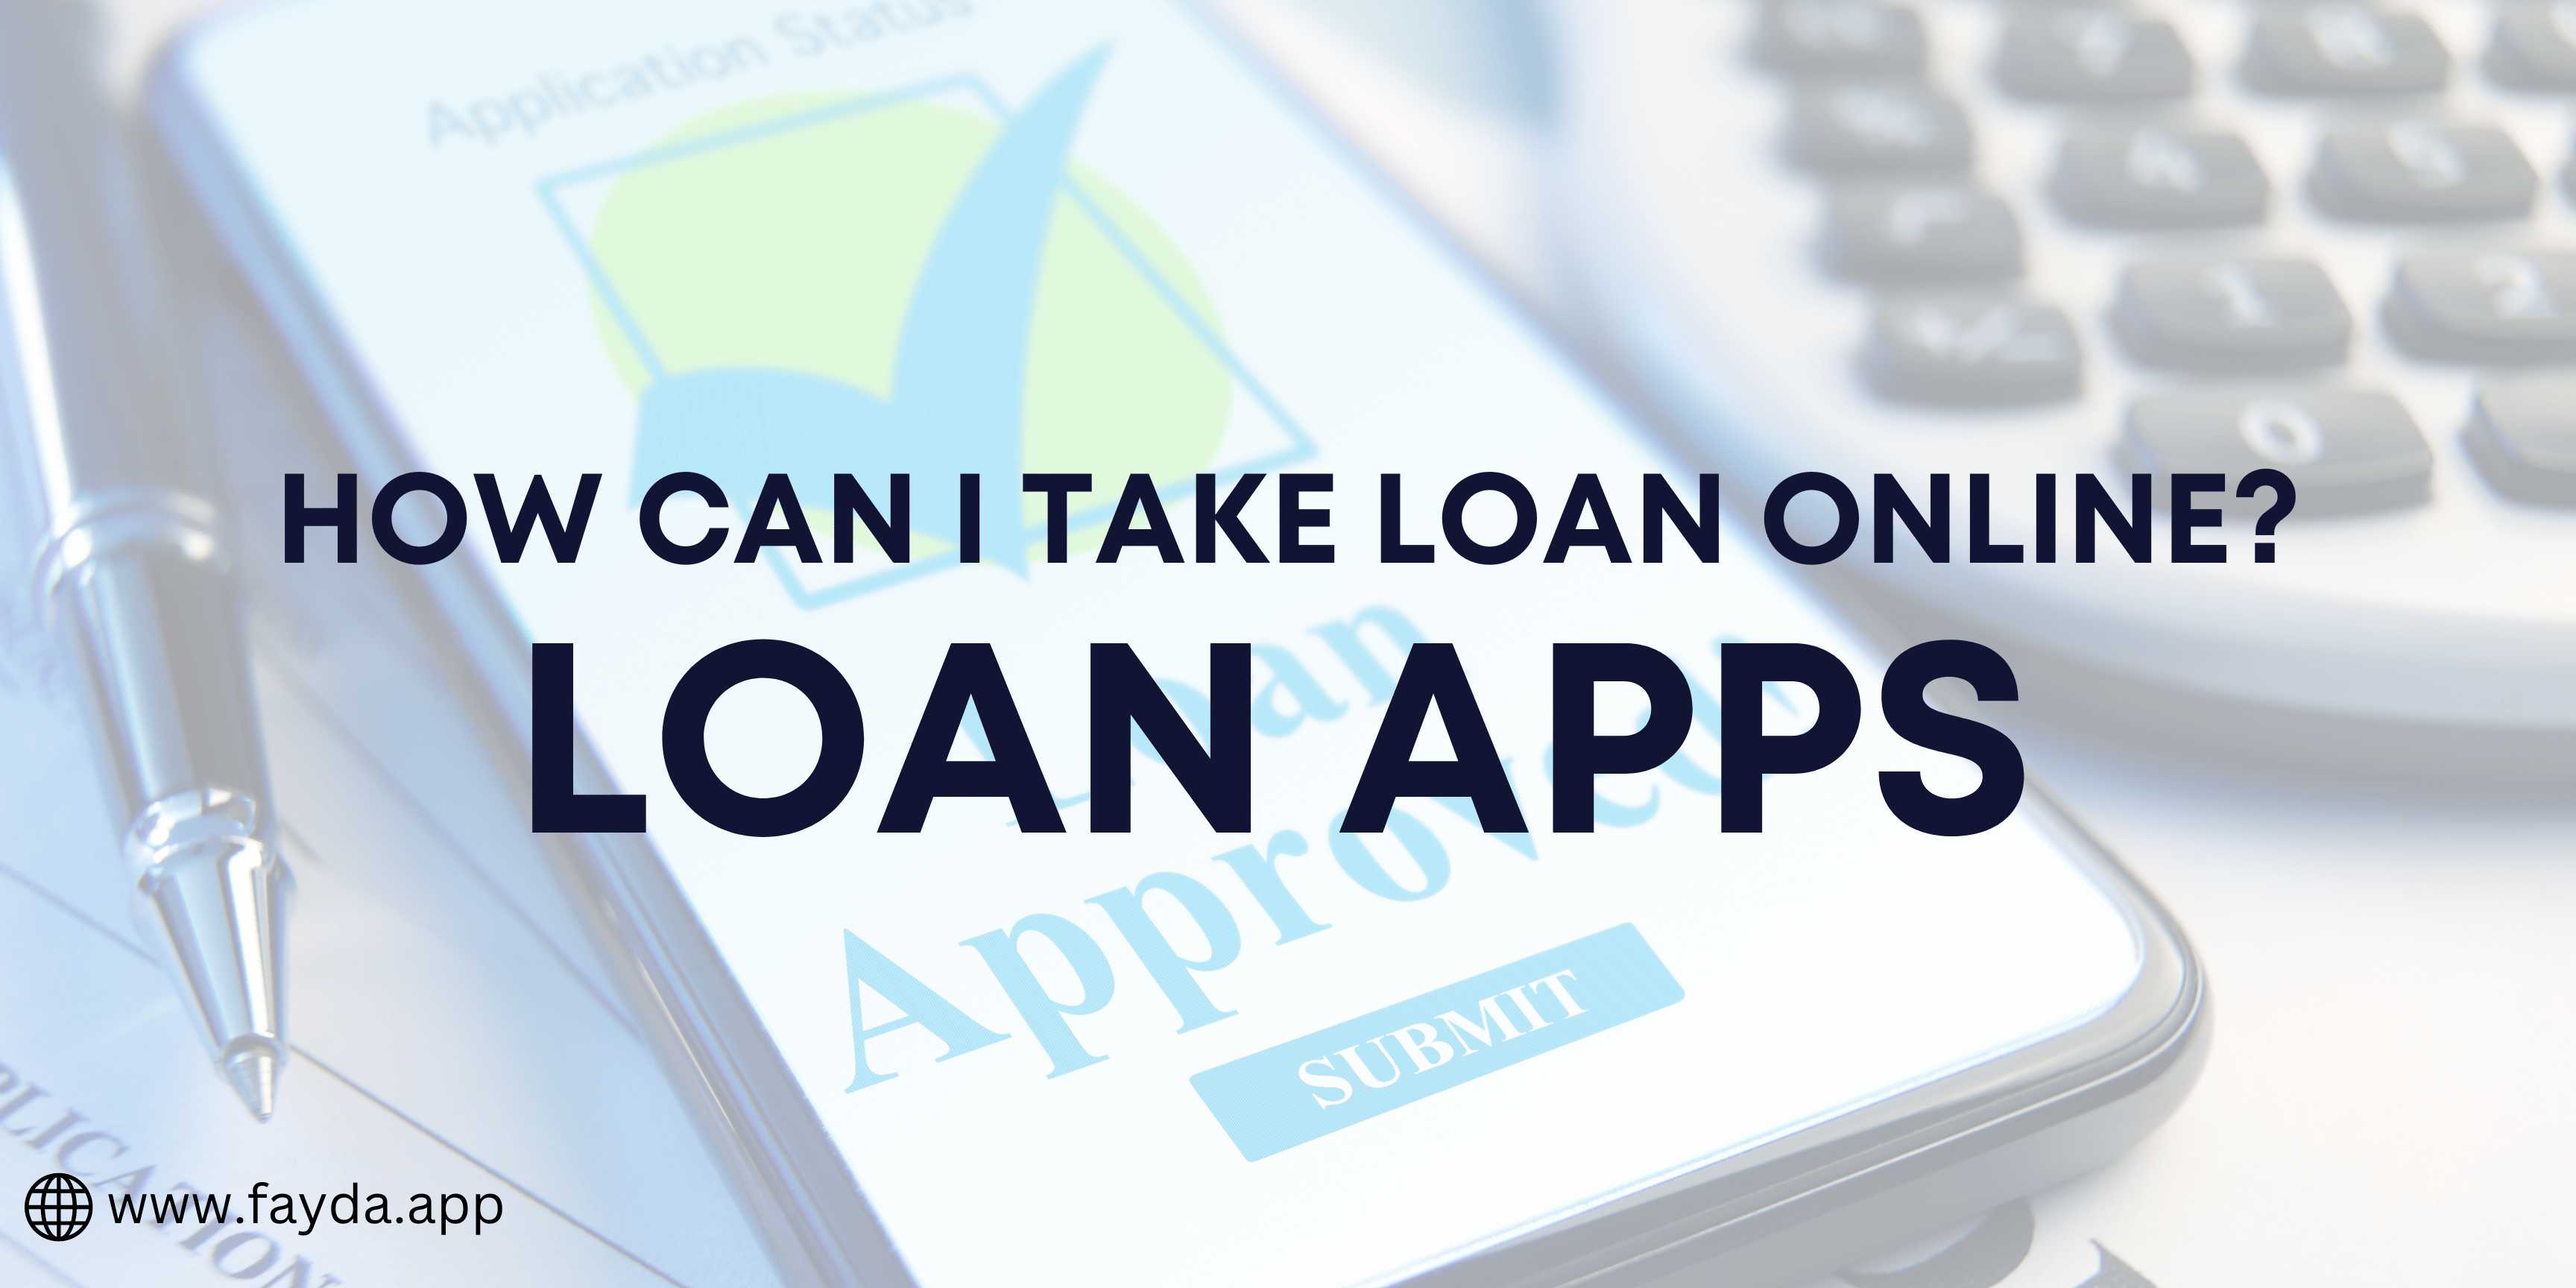 How can I take loan online?